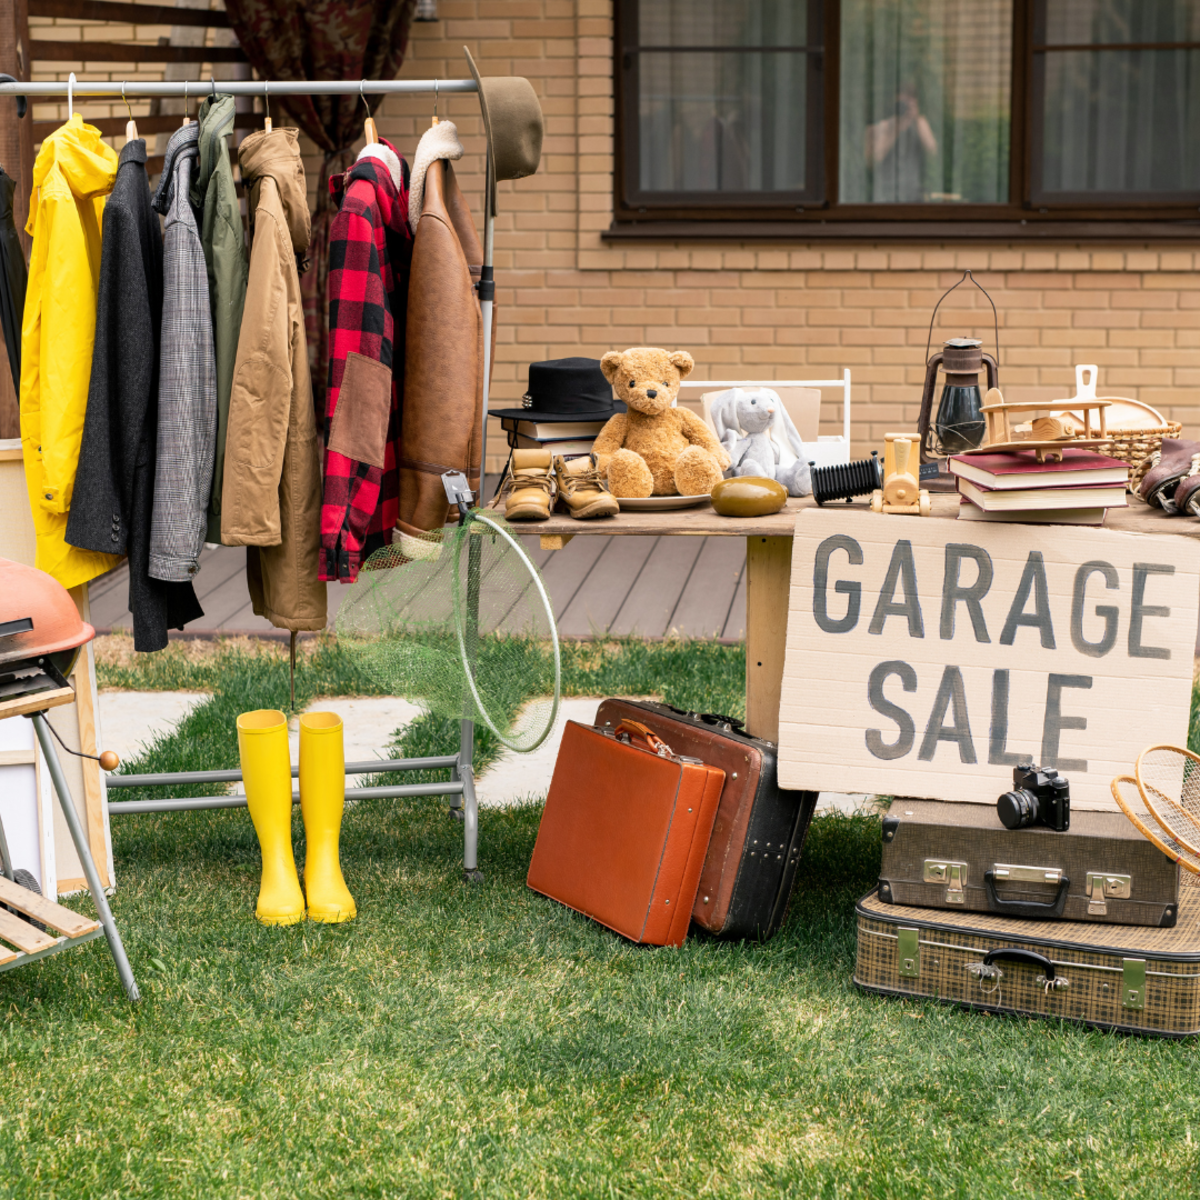 10 Items You Should Never Buy at a Garage Sale